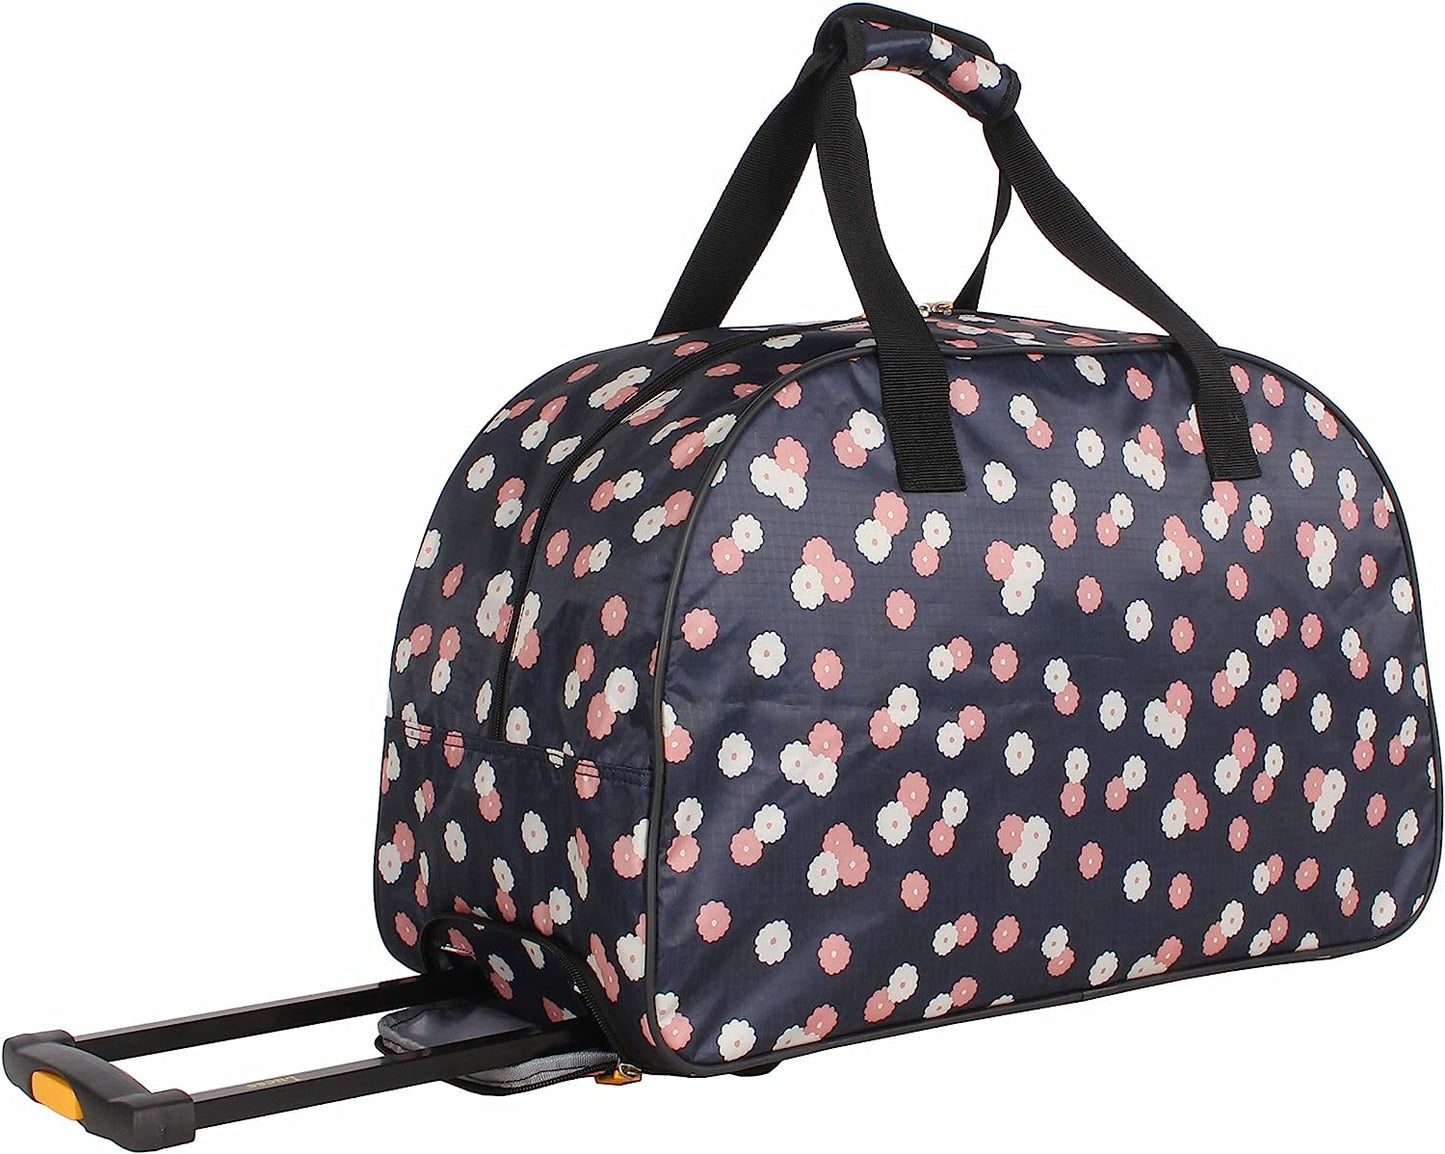 Designer Carry On Luggage Collection - Lightweight Pattern 22 Inch Duffel Bag- Weekender Overnight Business Travel Suitcase with 2- Rolling Spinner Wheels (Ditty Floral)